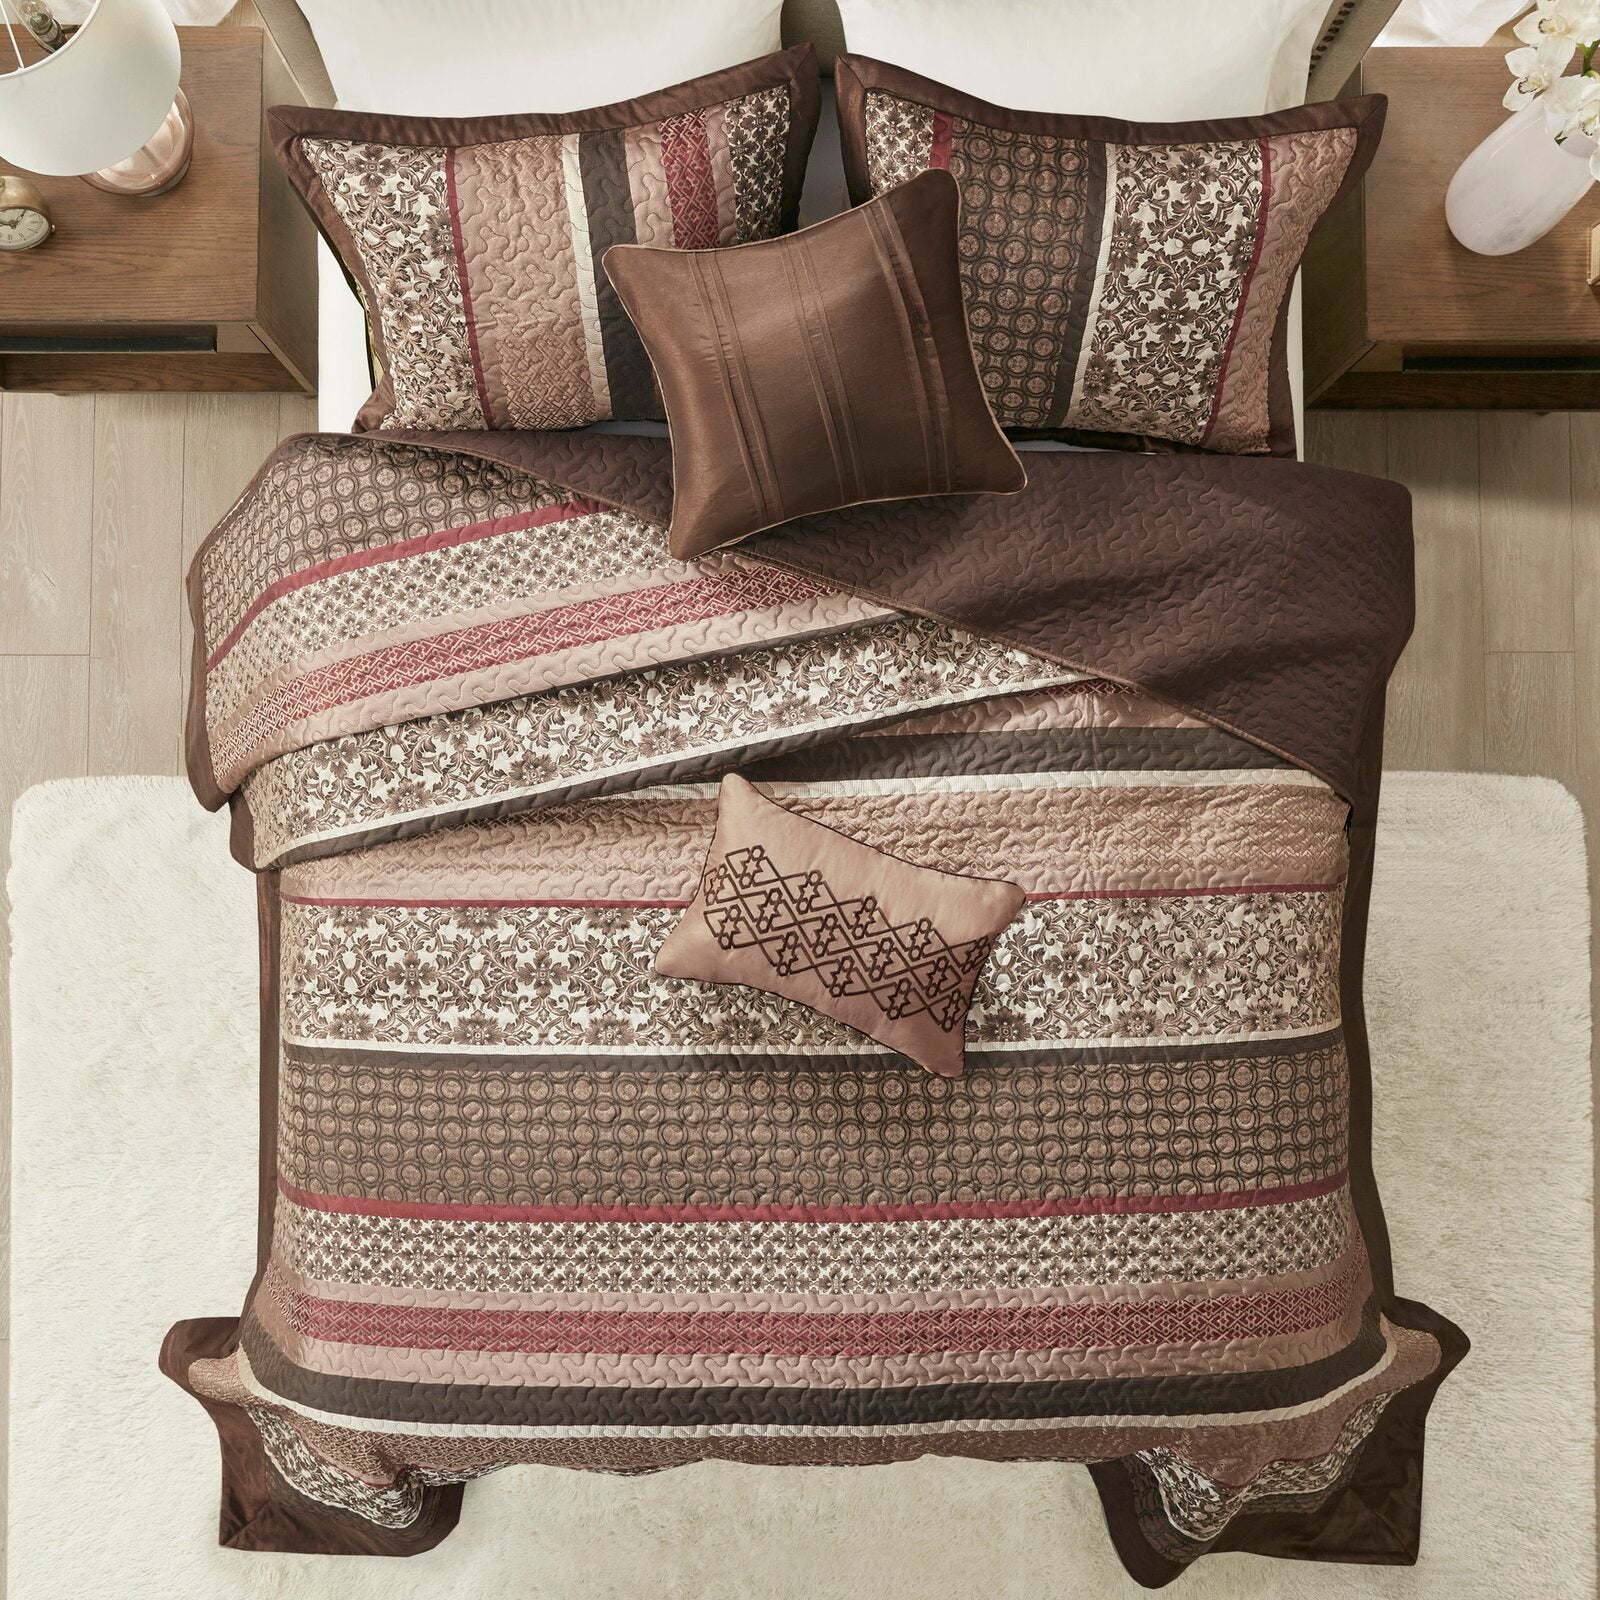 Queen Chocolate Brown Oversized Lakemore 5 Piece Reversible Coverlet Set SC594